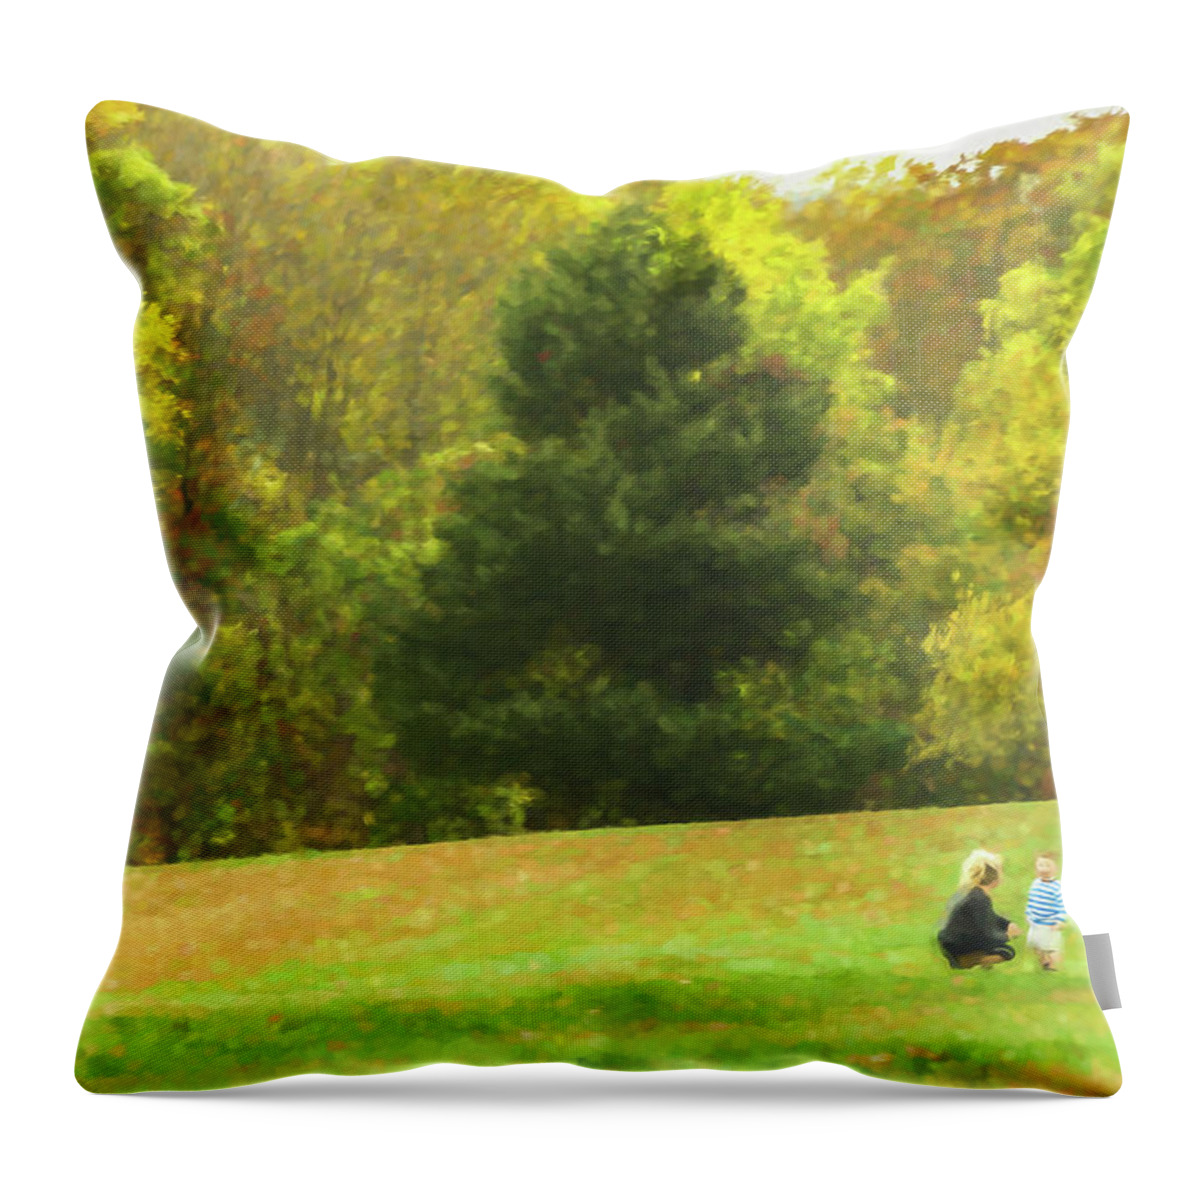 Landscape Throw Pillow featuring the digital art A Quiet Moment Between Mother and Son by Patrice Zinck